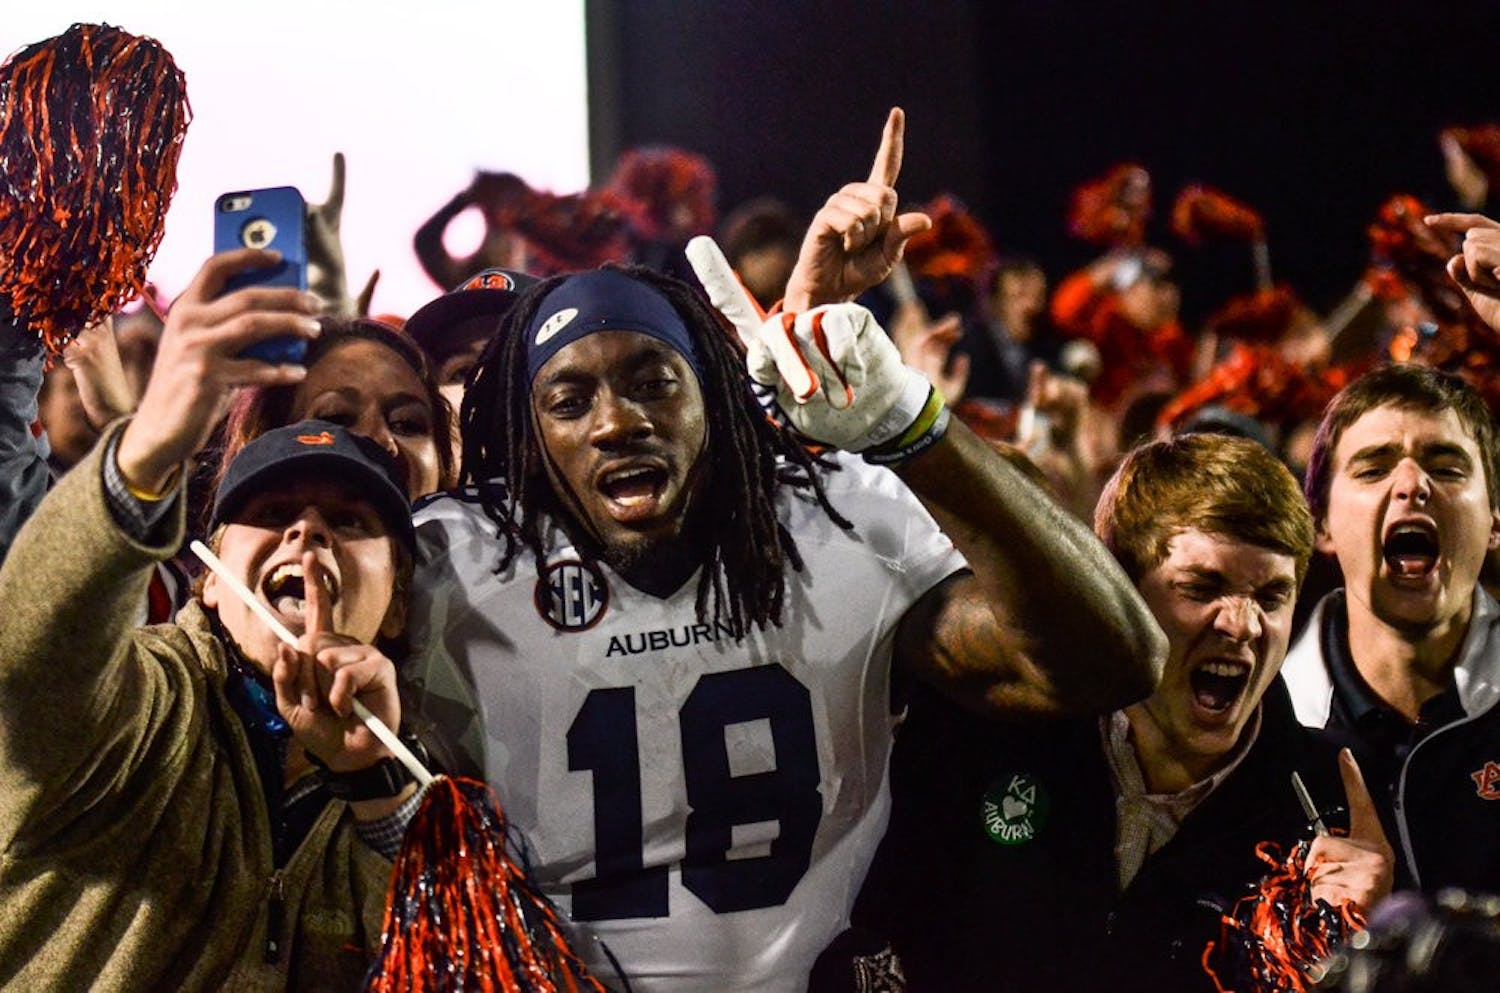 Sammie Coates celebrates with the Auburn section after the road win over Ole Miss.

Raye May / PHOTO EDITOR